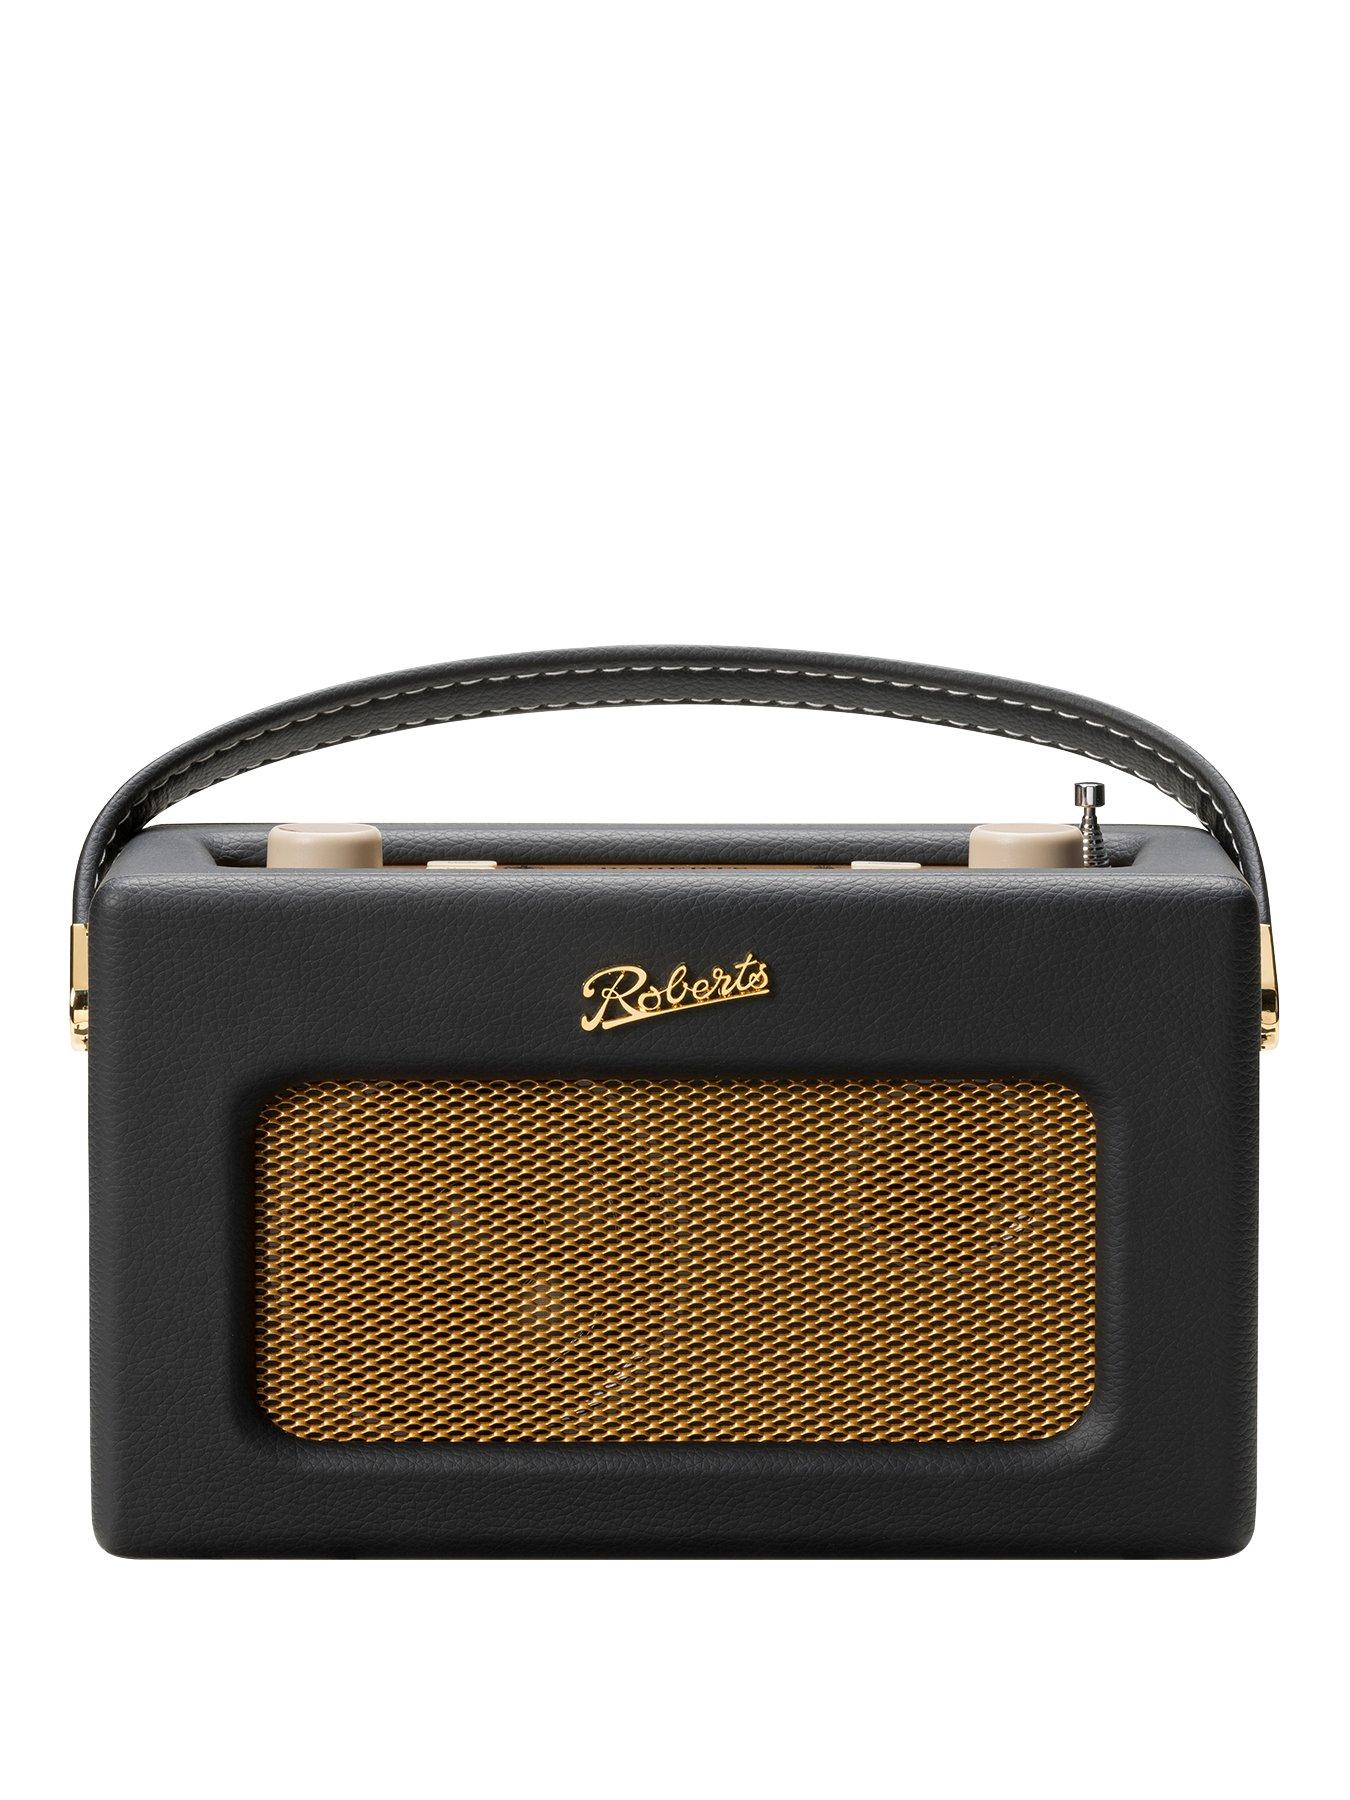 Roberts Revival Rd70 Digital Radio With Alarms And Bluetooth Streaming – Black